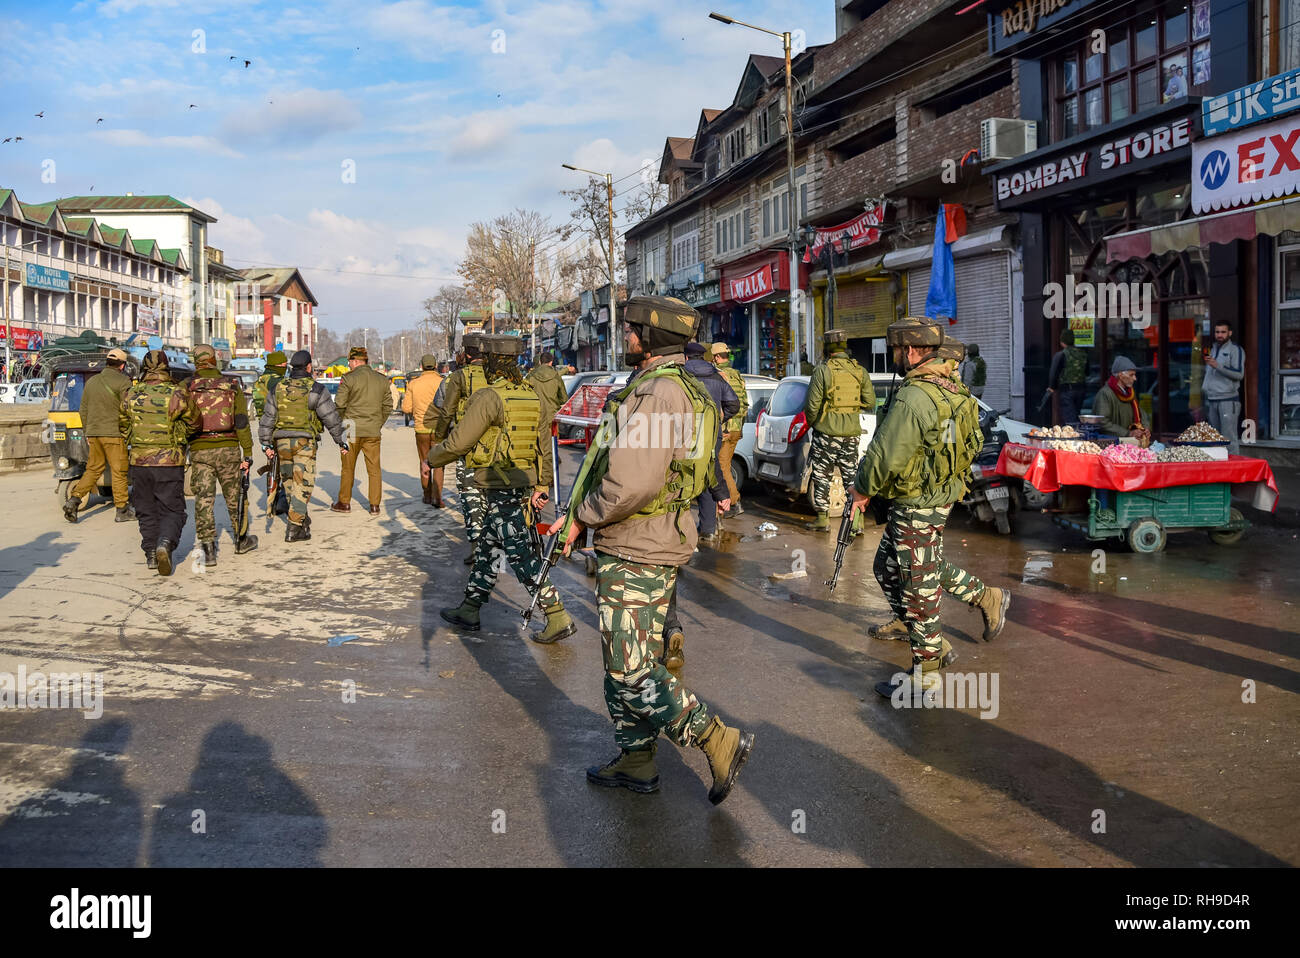 Indian paramilitary troopers seen patrolling during a random search operation in Srinagar. Security has been heightened in Kashmir region ahead of the Indian prime minister's visit scheduled on February 3. Stock Photo